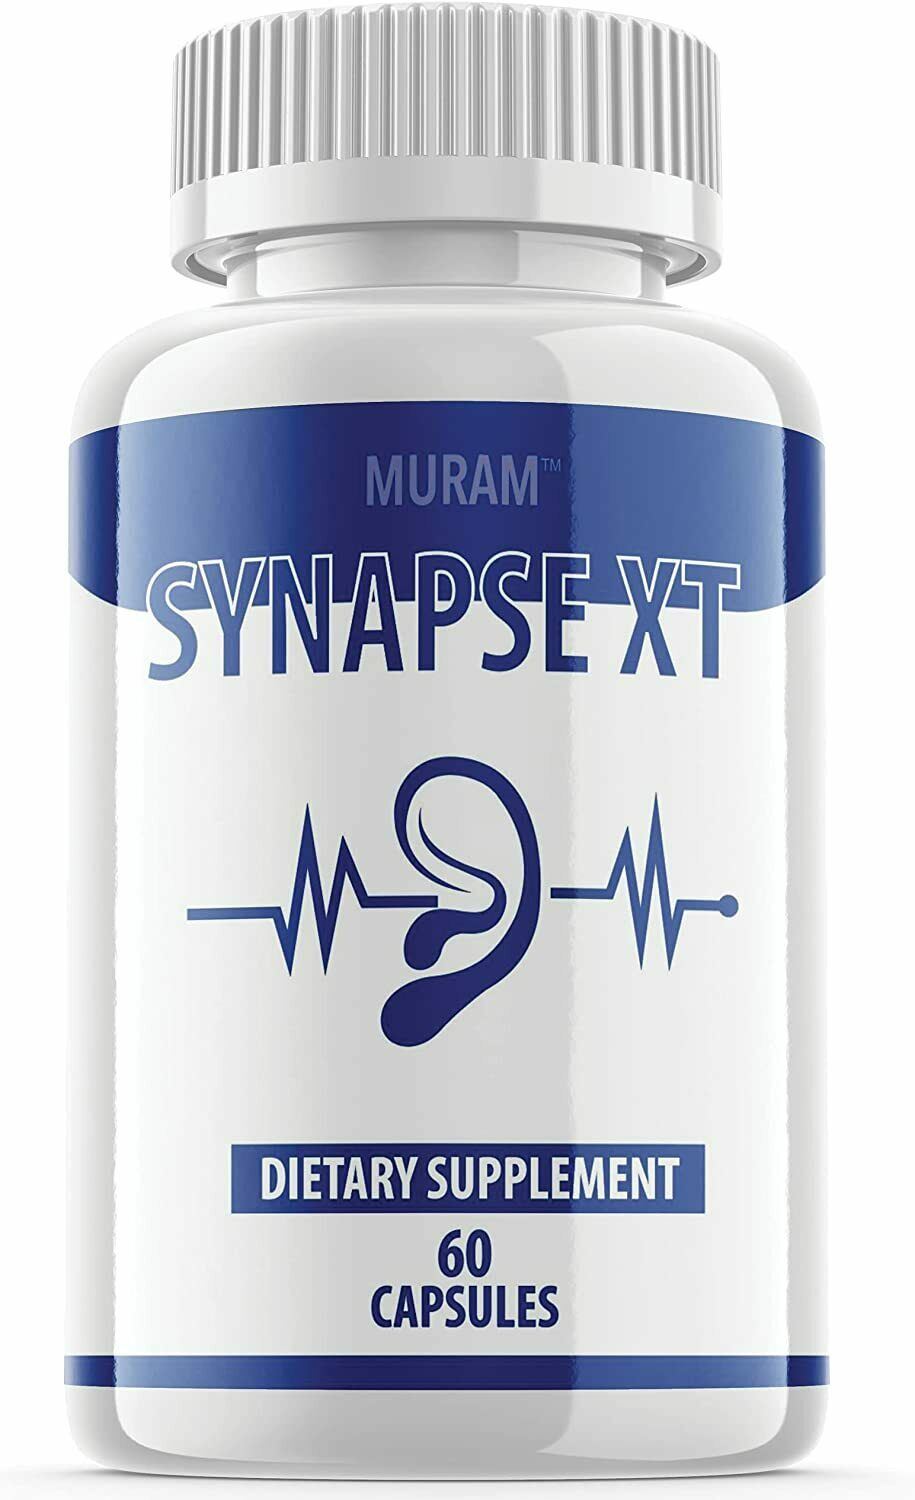 Synapse XT Advanced Supplement Pills for Tinnitus, Support Ear Health 60 caps